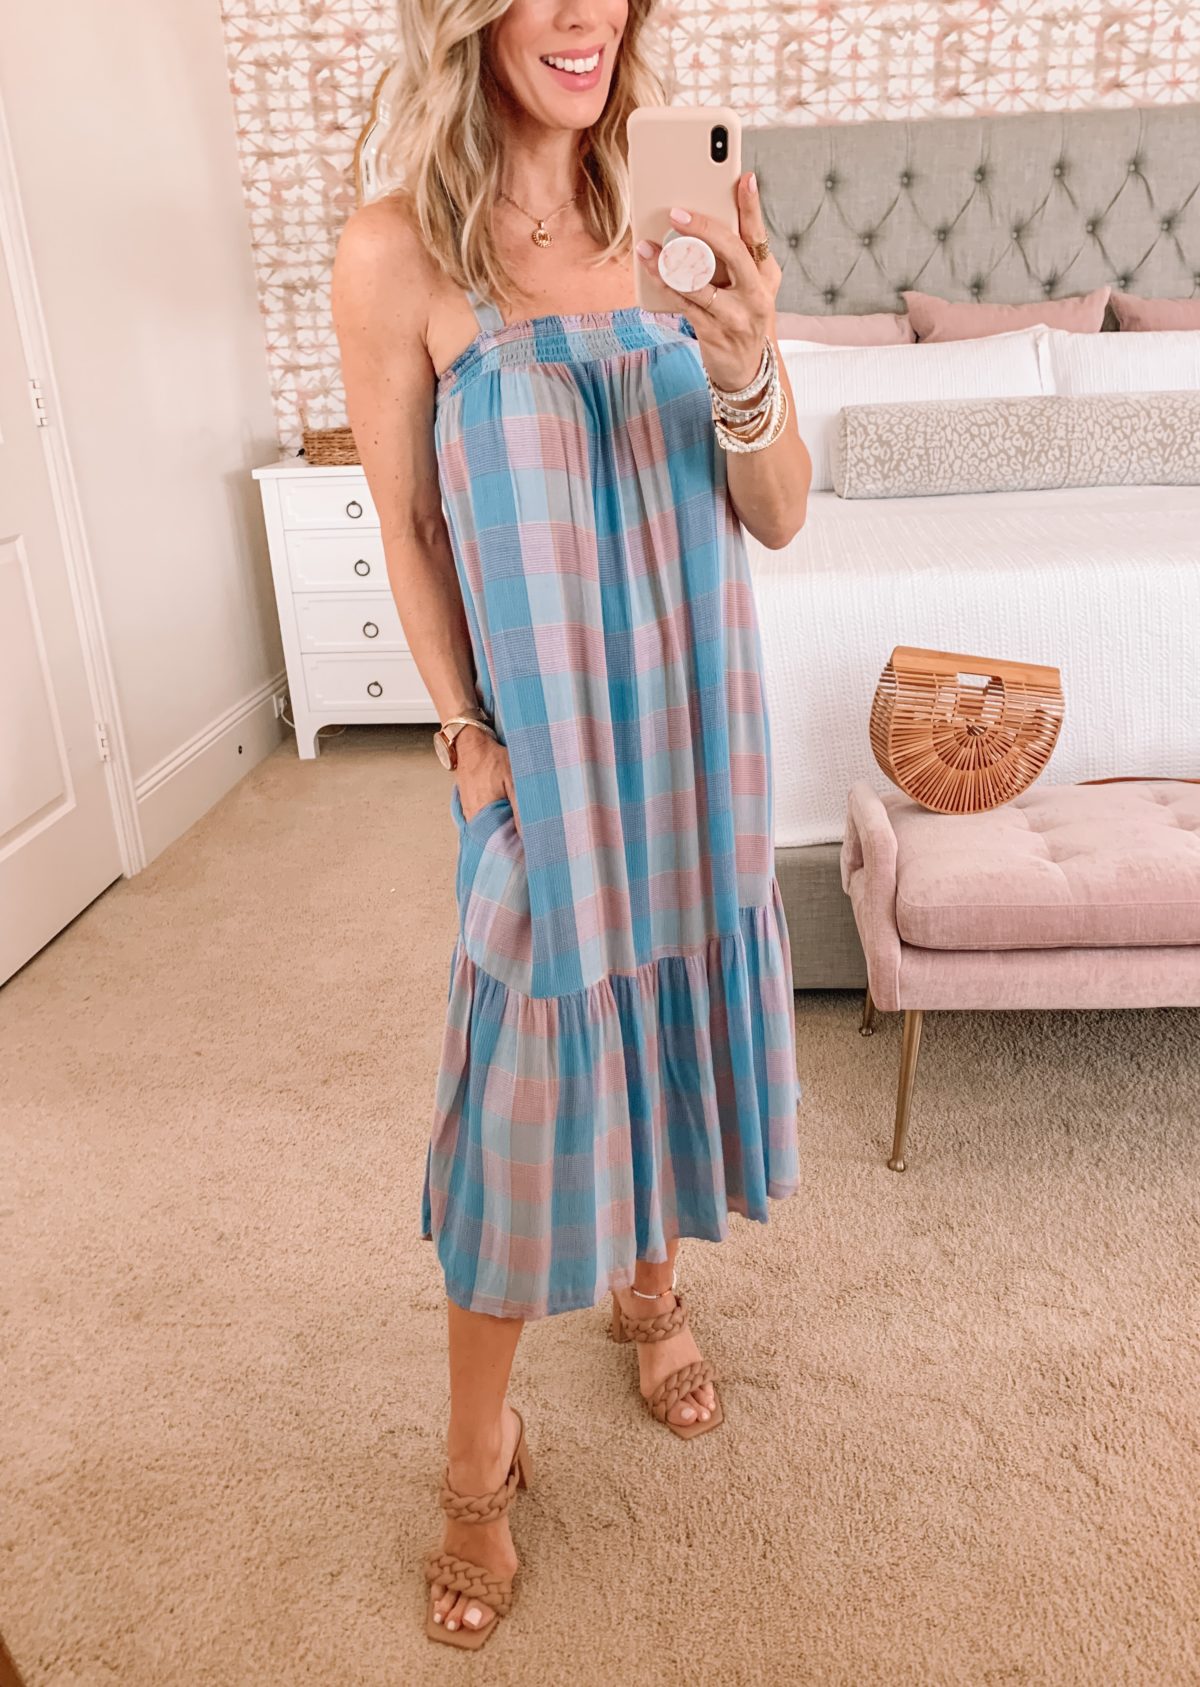 Dressing Room Finds, Gingham Dress and Sandals with Bamboo Clutch 